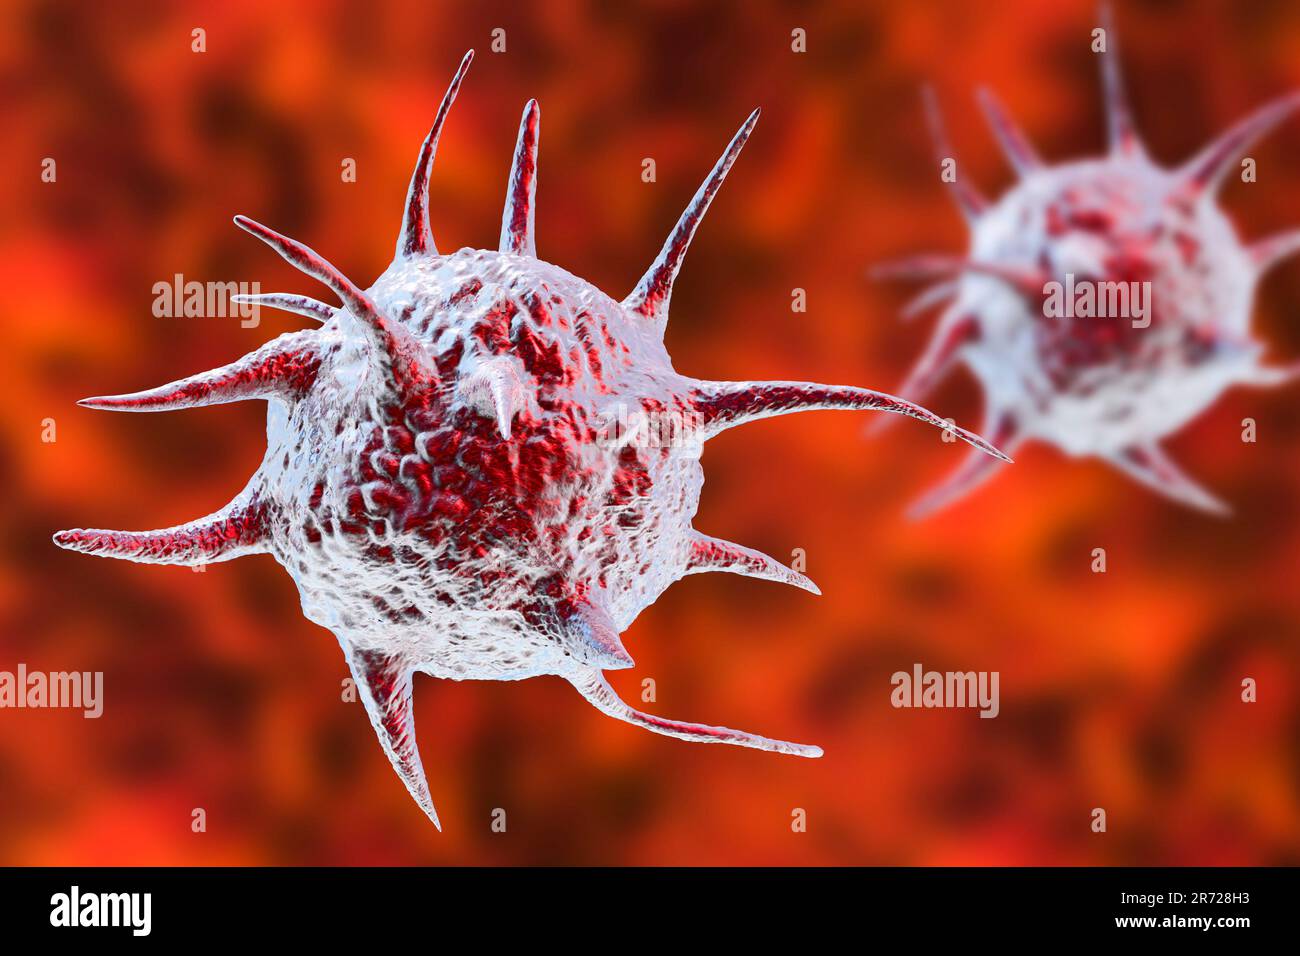 Computer illustration of an abstract pathogenic microorganisms which can be used as a medical or scientific background. Stock Photo